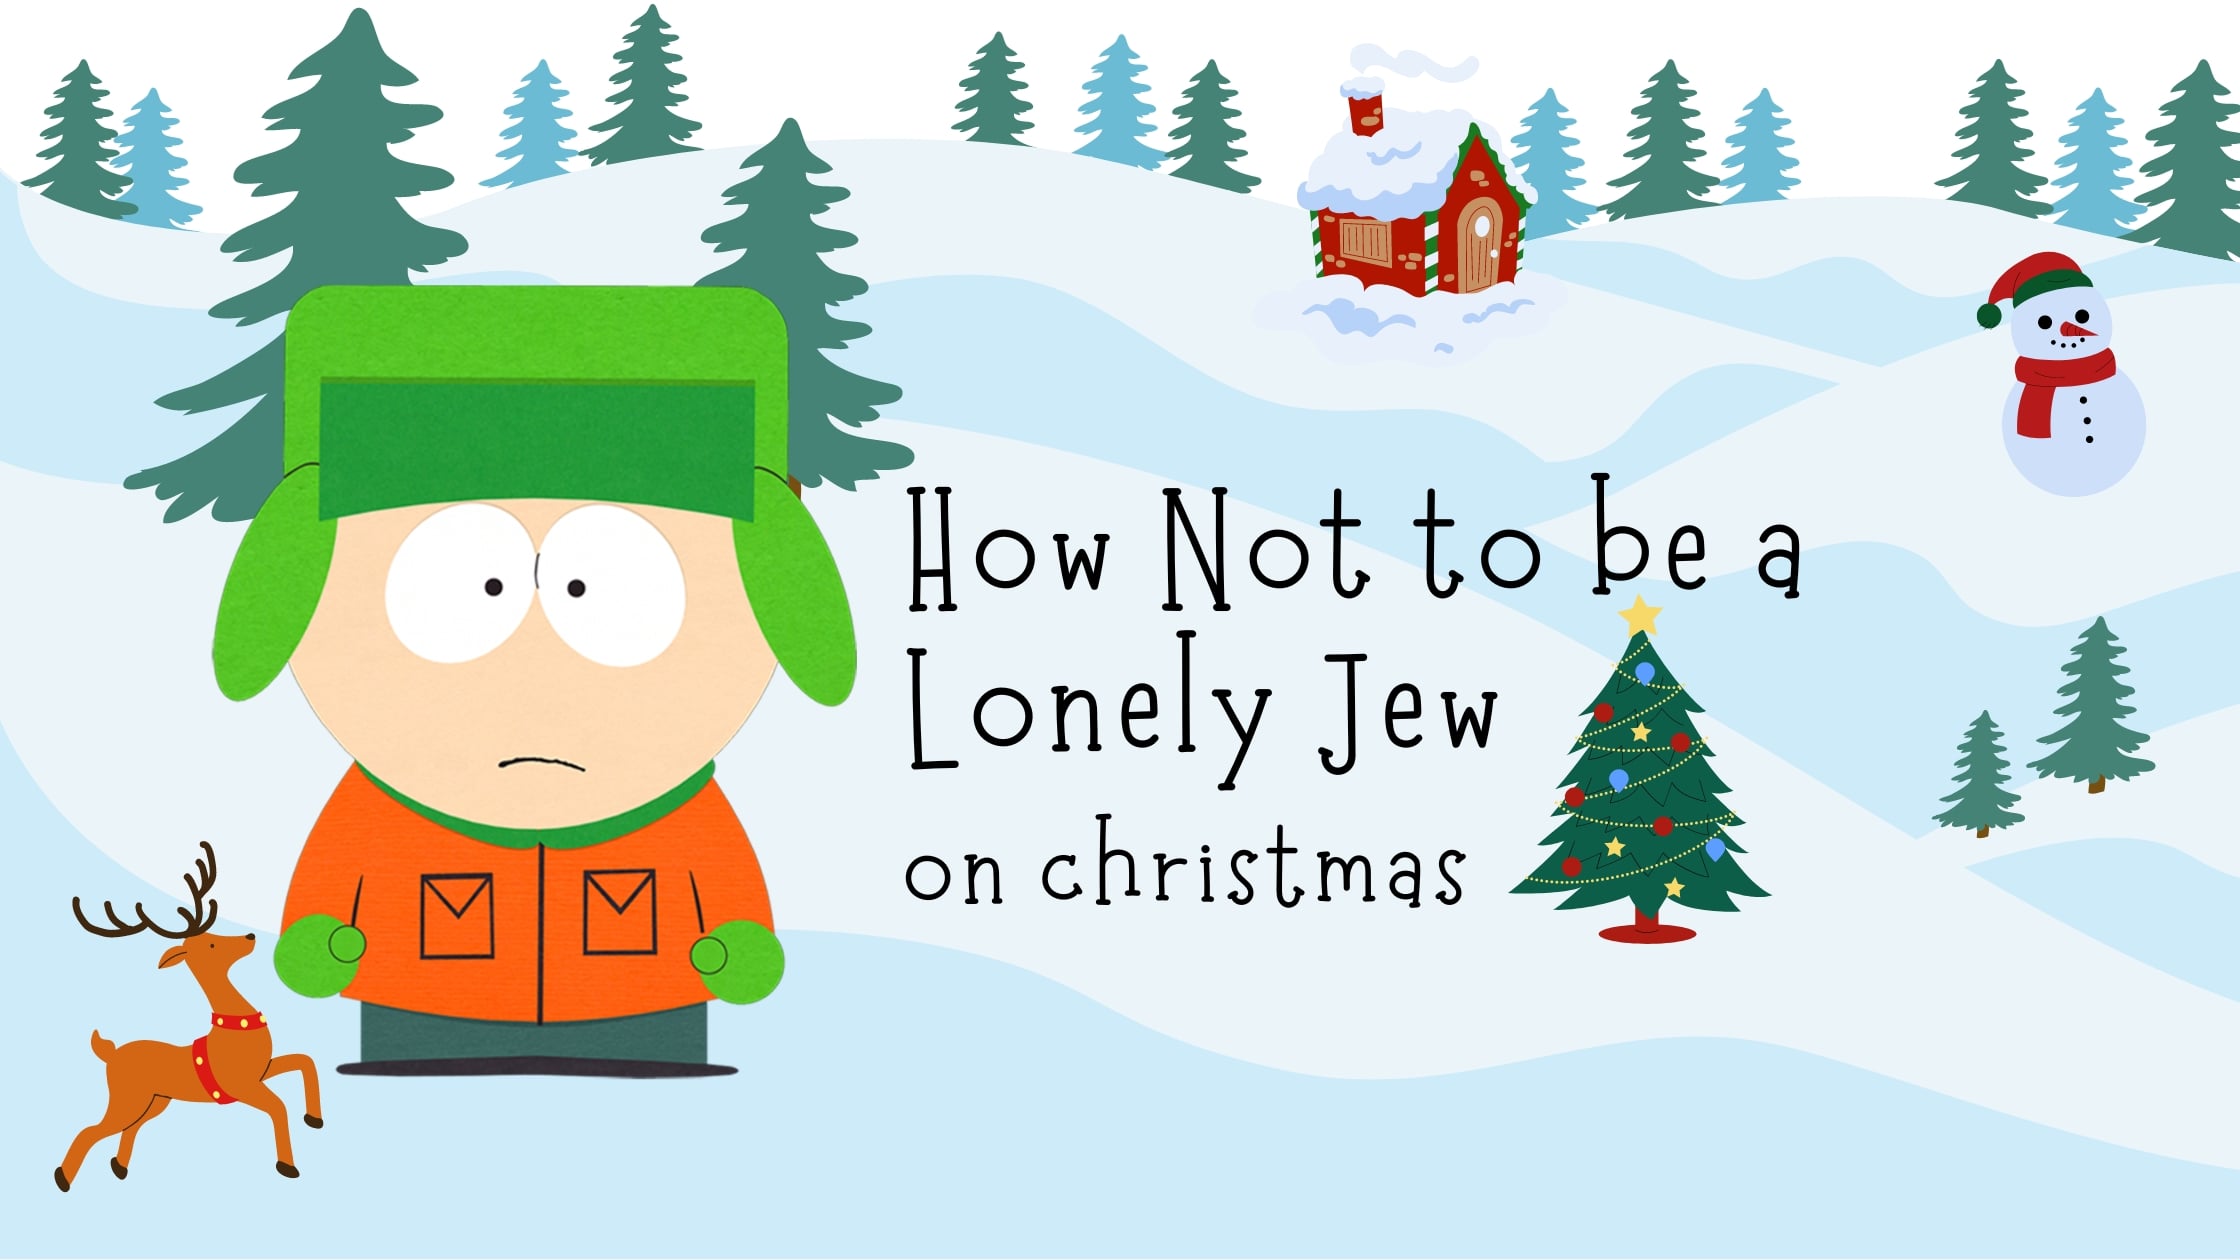 lonely Jew on Christmas, portrayal of jews in hollywood, Stereotypes of Jews, Stereotypes of Jews in media, Jew on Christmas,